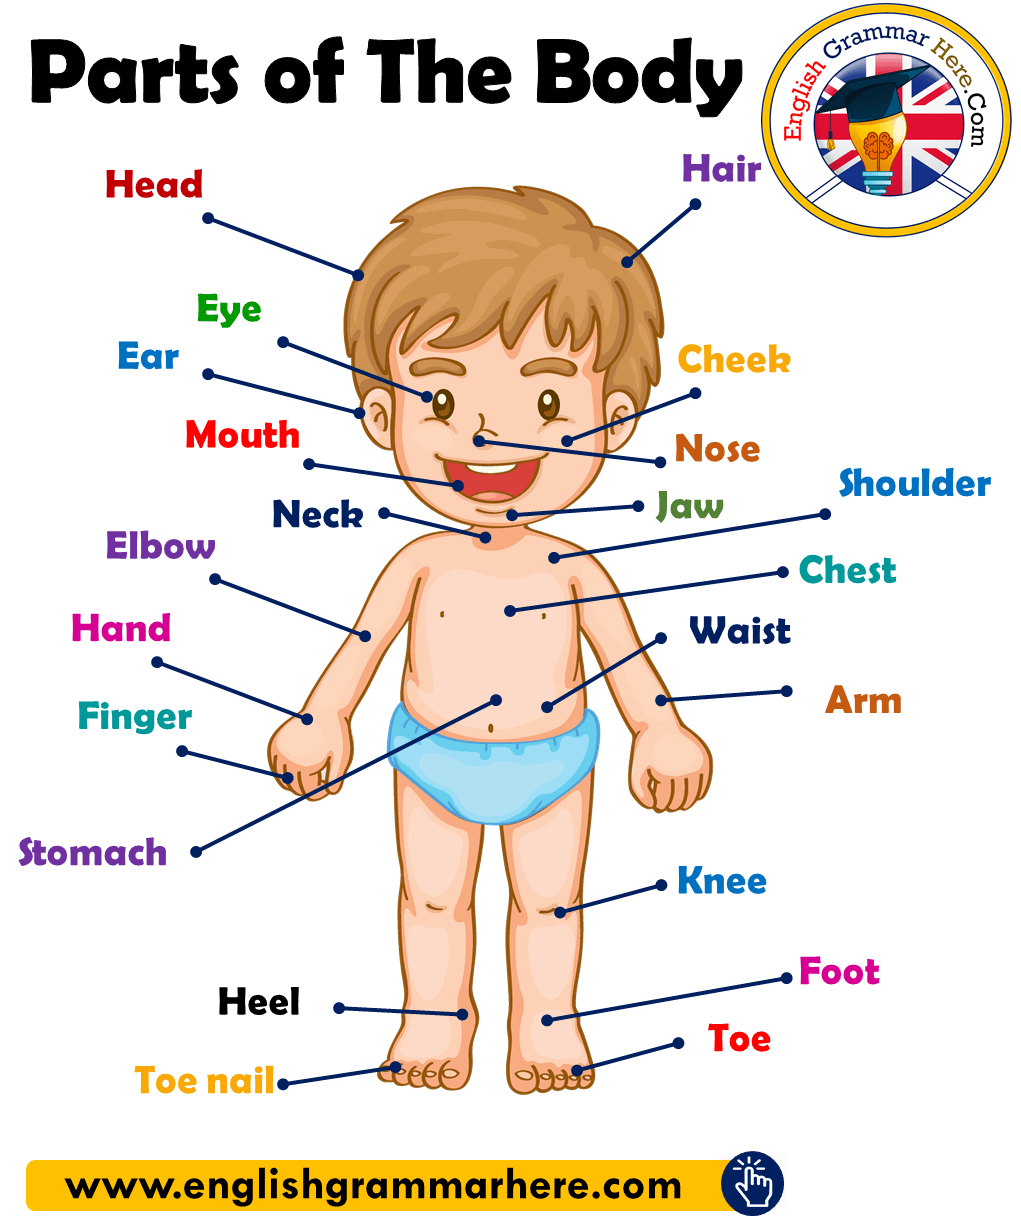 Parts of The Body in English, Parts of Human Body